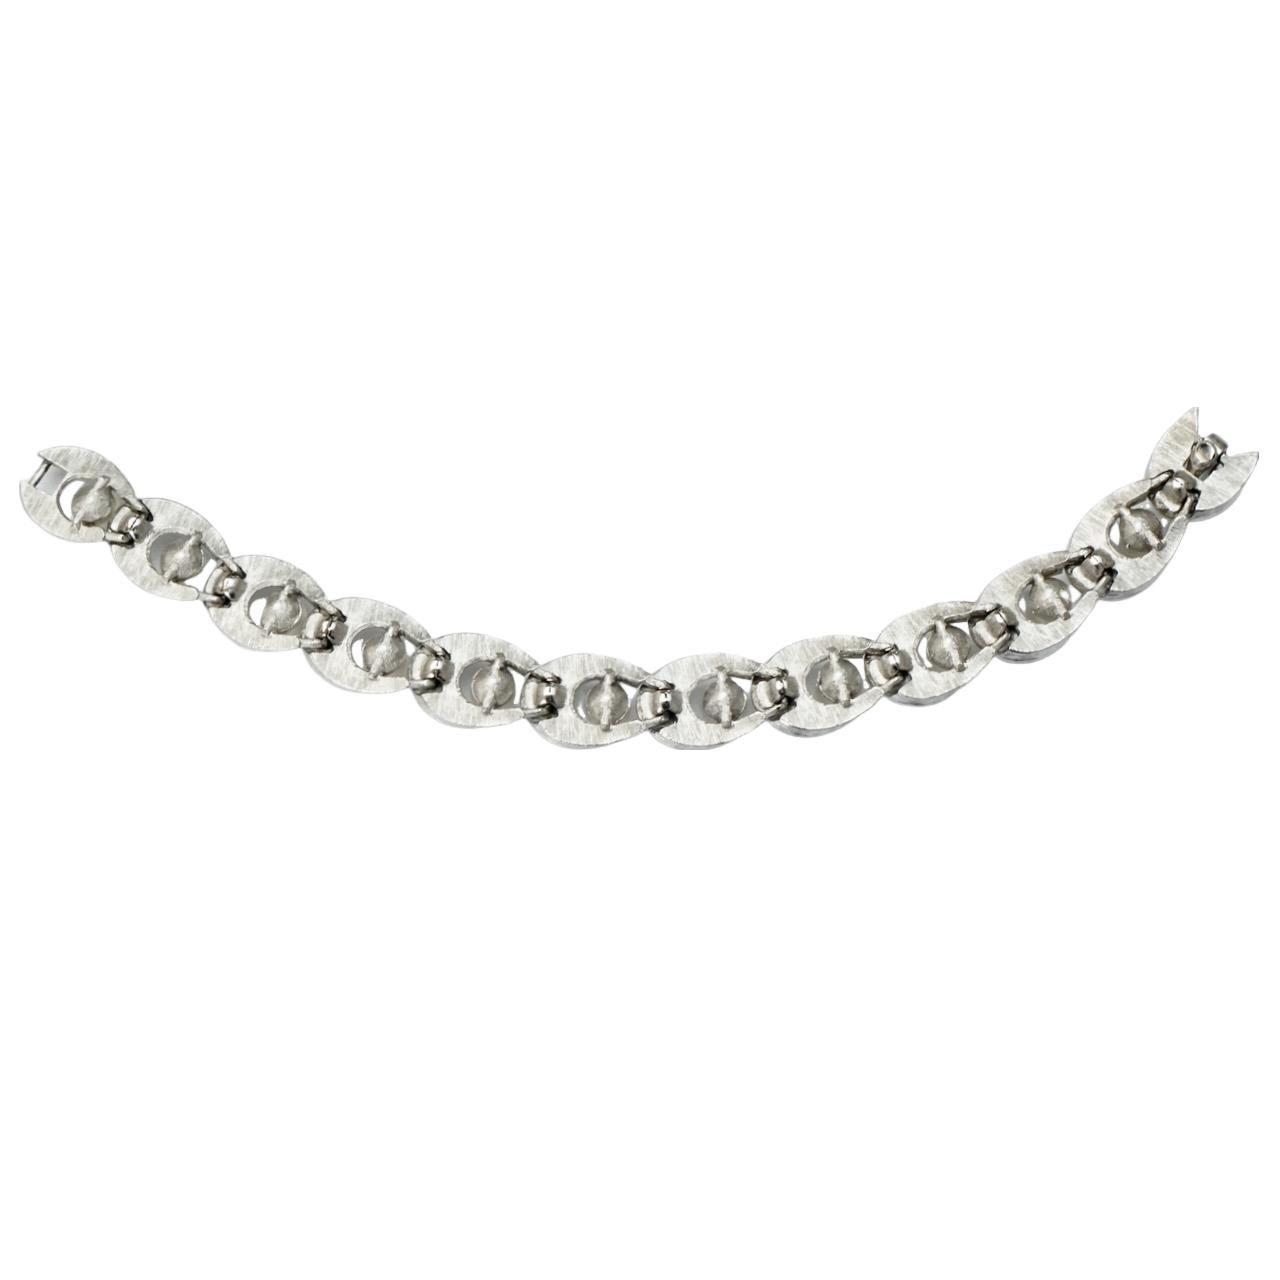 Trifari Silver Plated Brushed and Shiny Bracelet with Faux Pearls circa 1960s For Sale 1